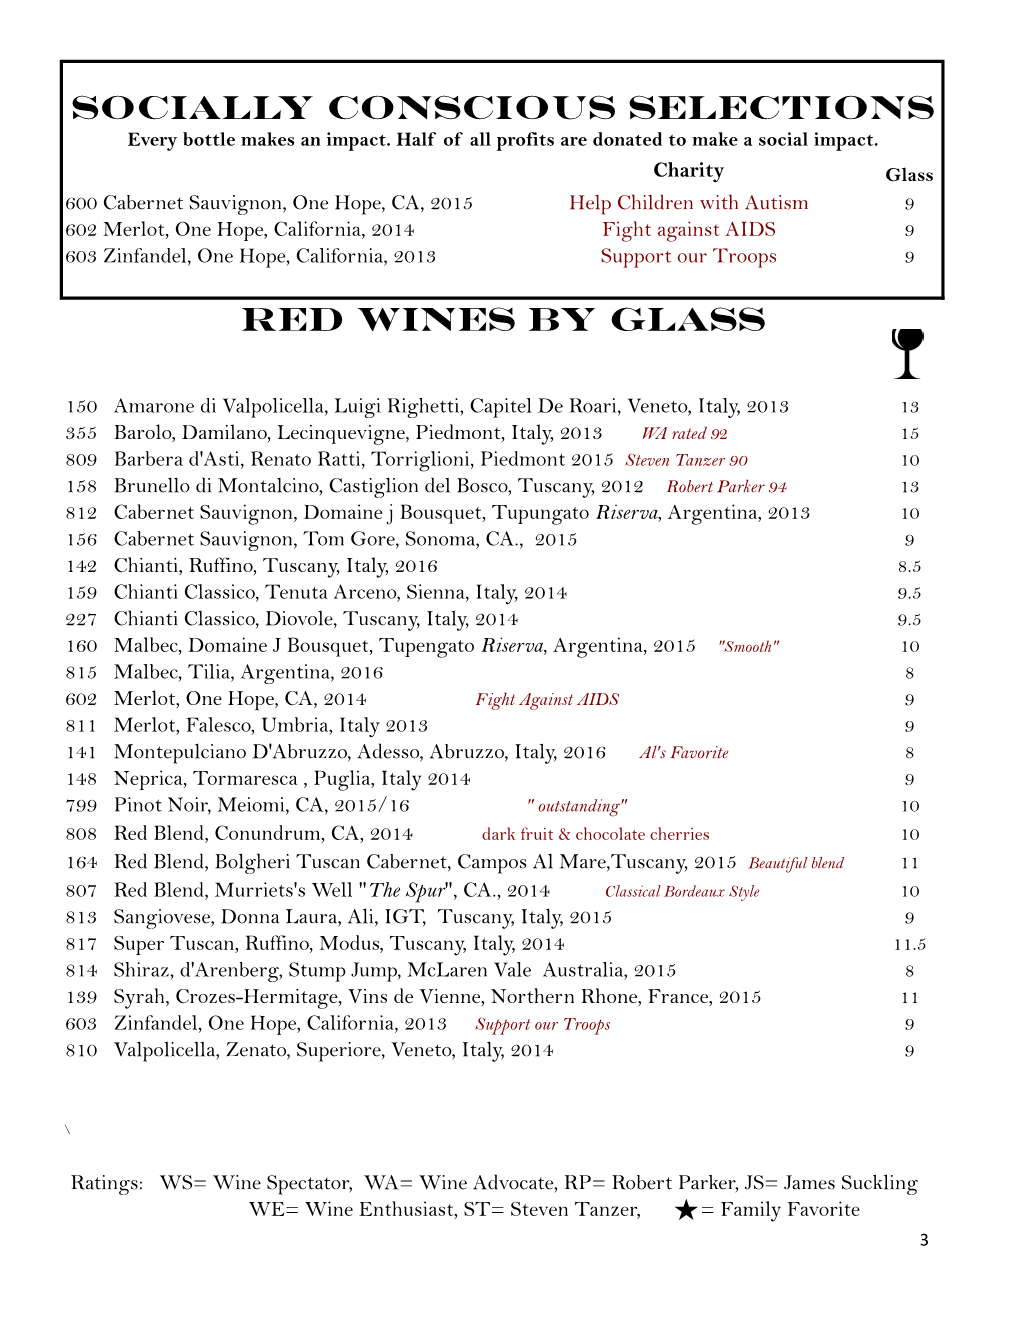 New Master Wine List 2017 Extra Pages.Xlsx